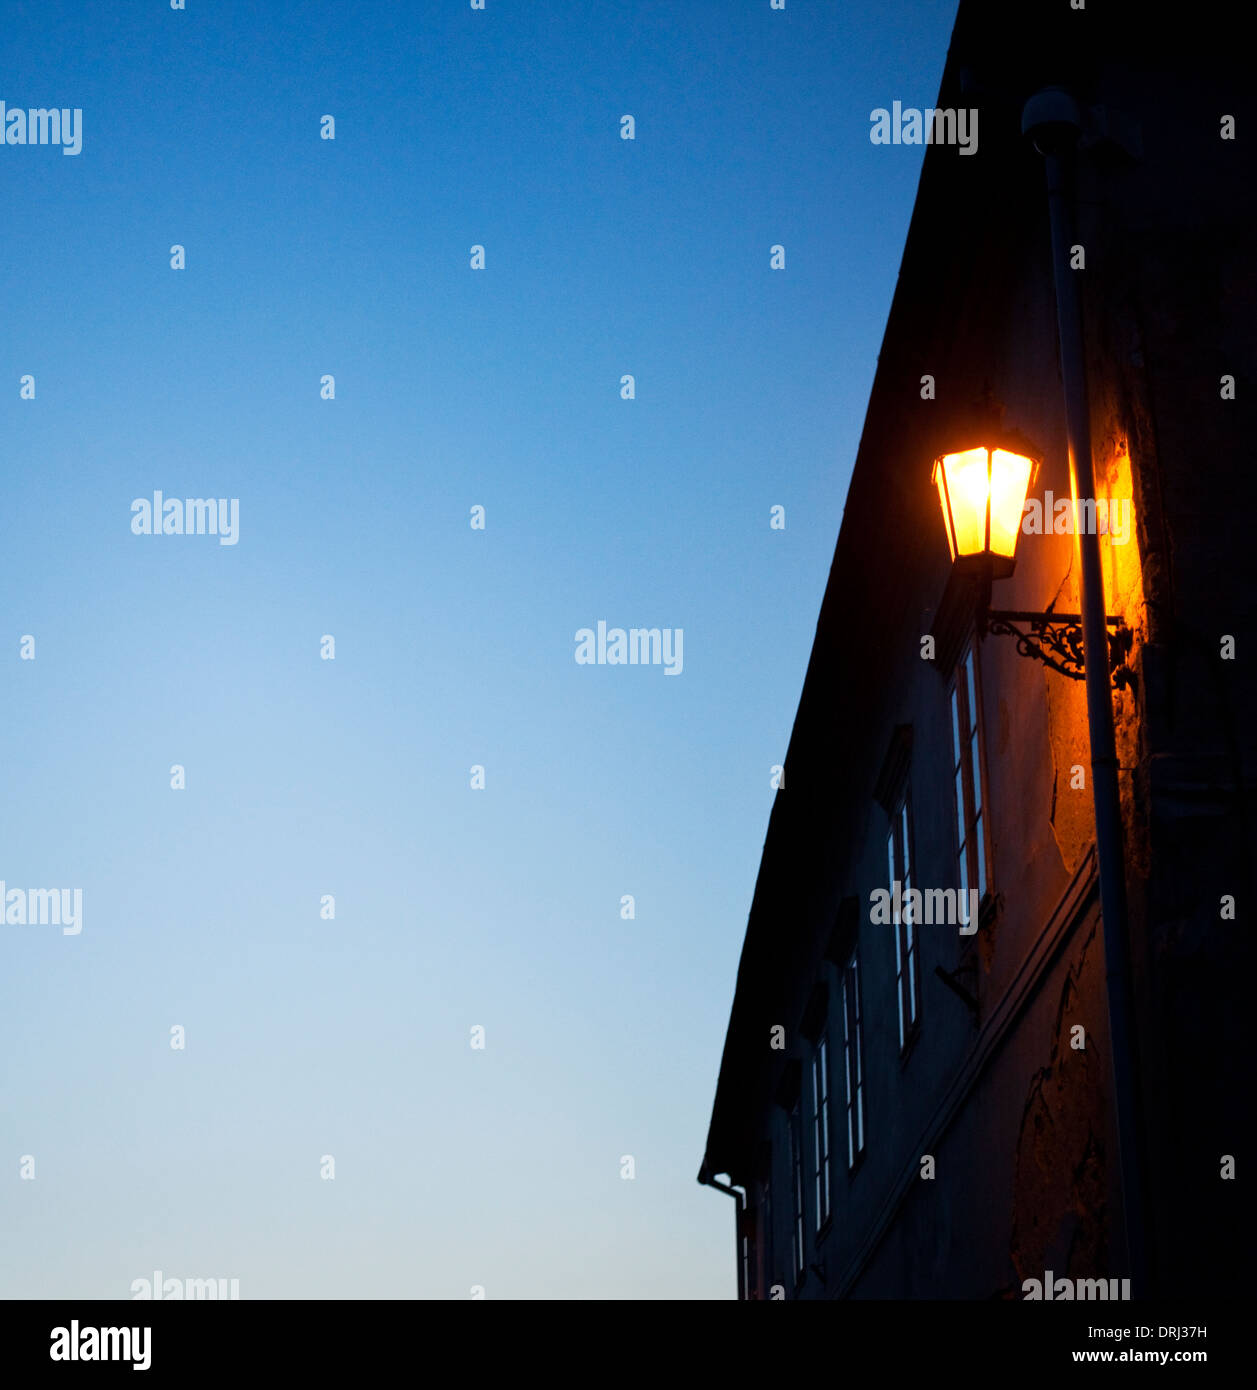 House facade with a lit exterior lighting Stock Photo